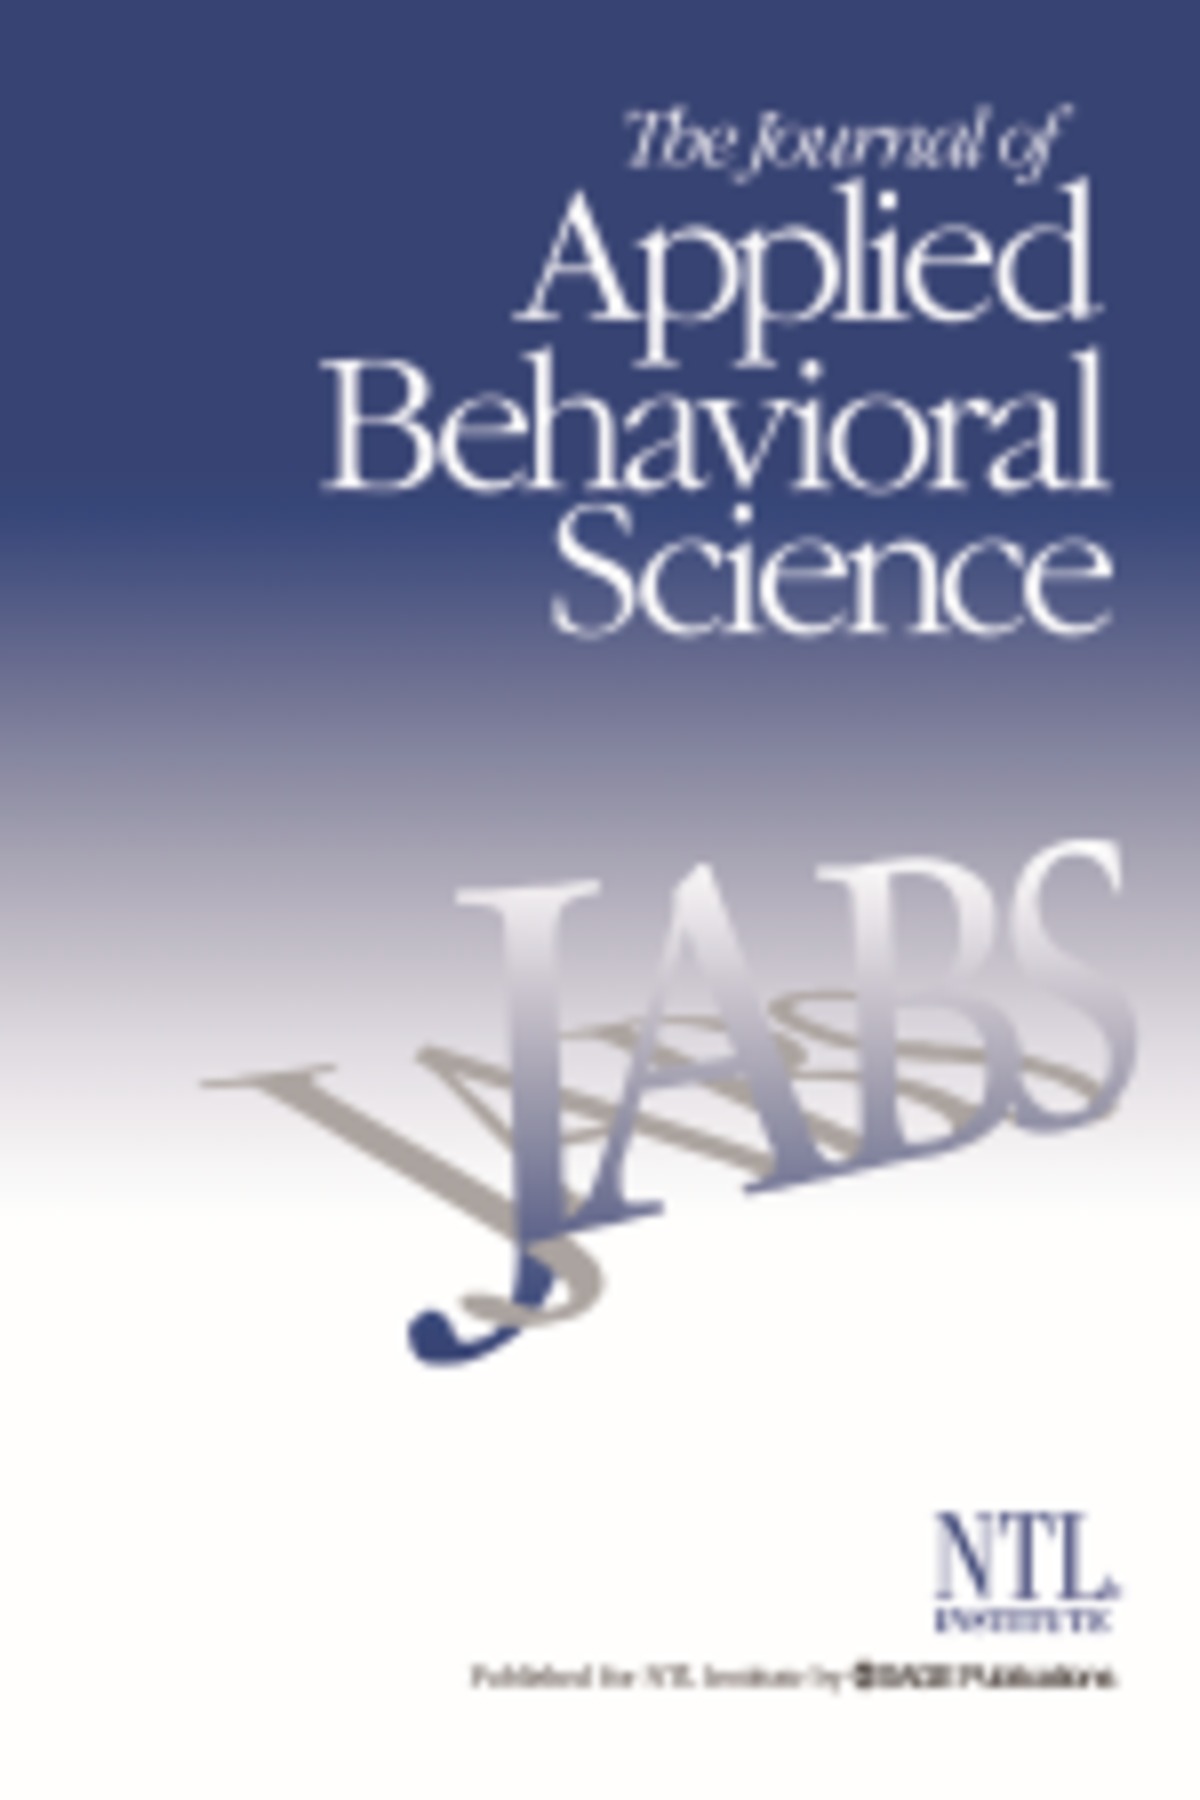 the journal of applied behavioral science